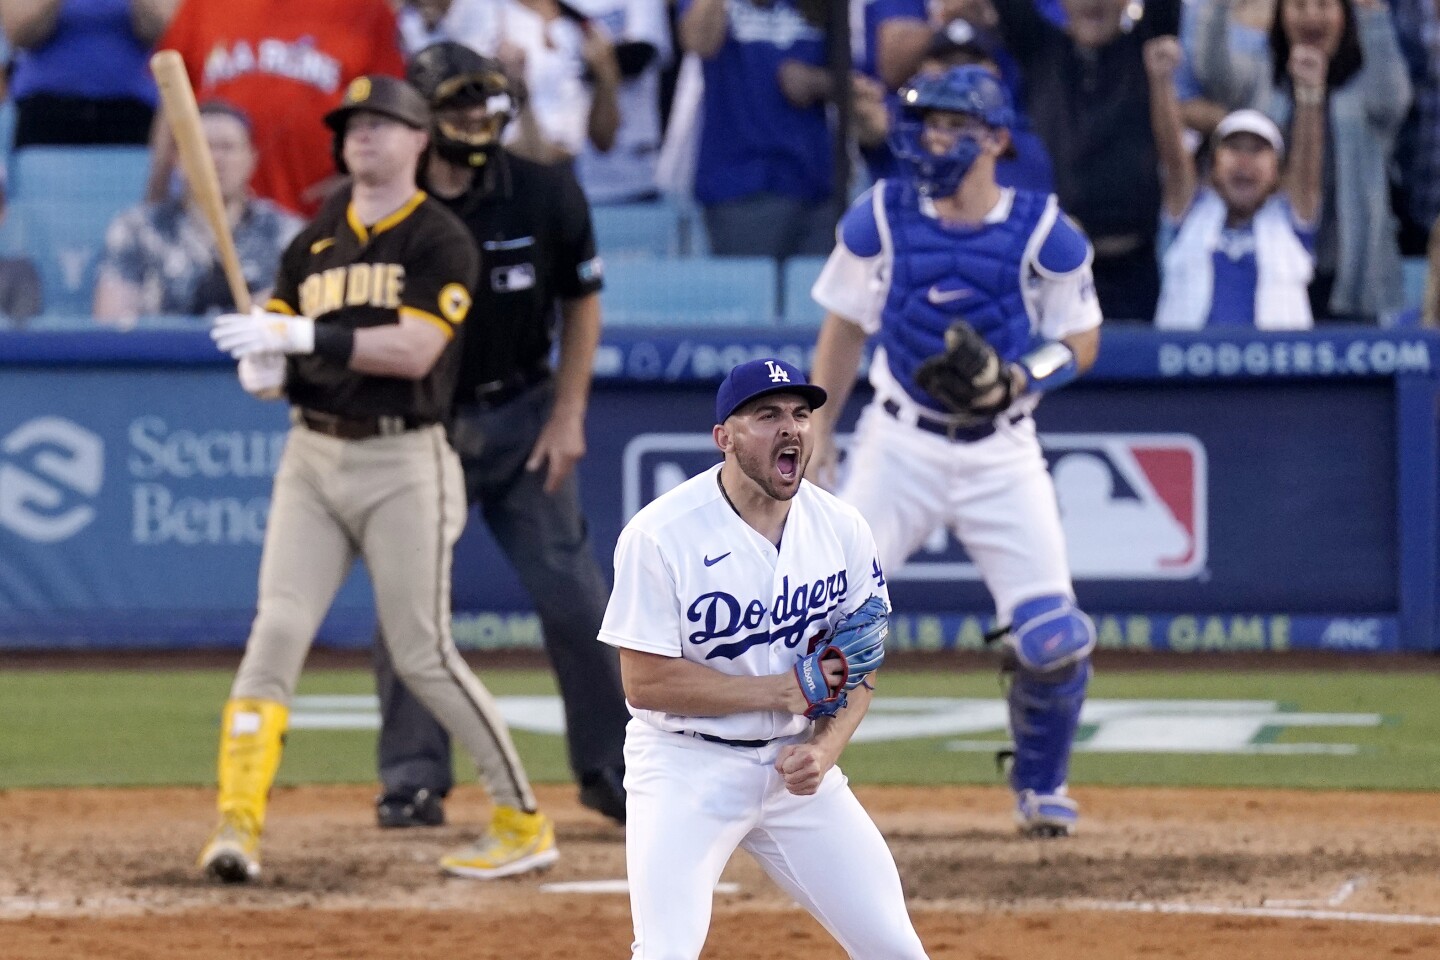 Los Angeles Dodgers relief pitcher Alex Vesia, second from right, celebrates after striking out San Diego Padres' Jake Cronenworth, left, to end the baseball game as home plate umpire Ben May, second from left, and catcher Will Smith watch Saturday, July 2, 2022, in Los Angeles. (AP Photo/Mark J. Terrill)